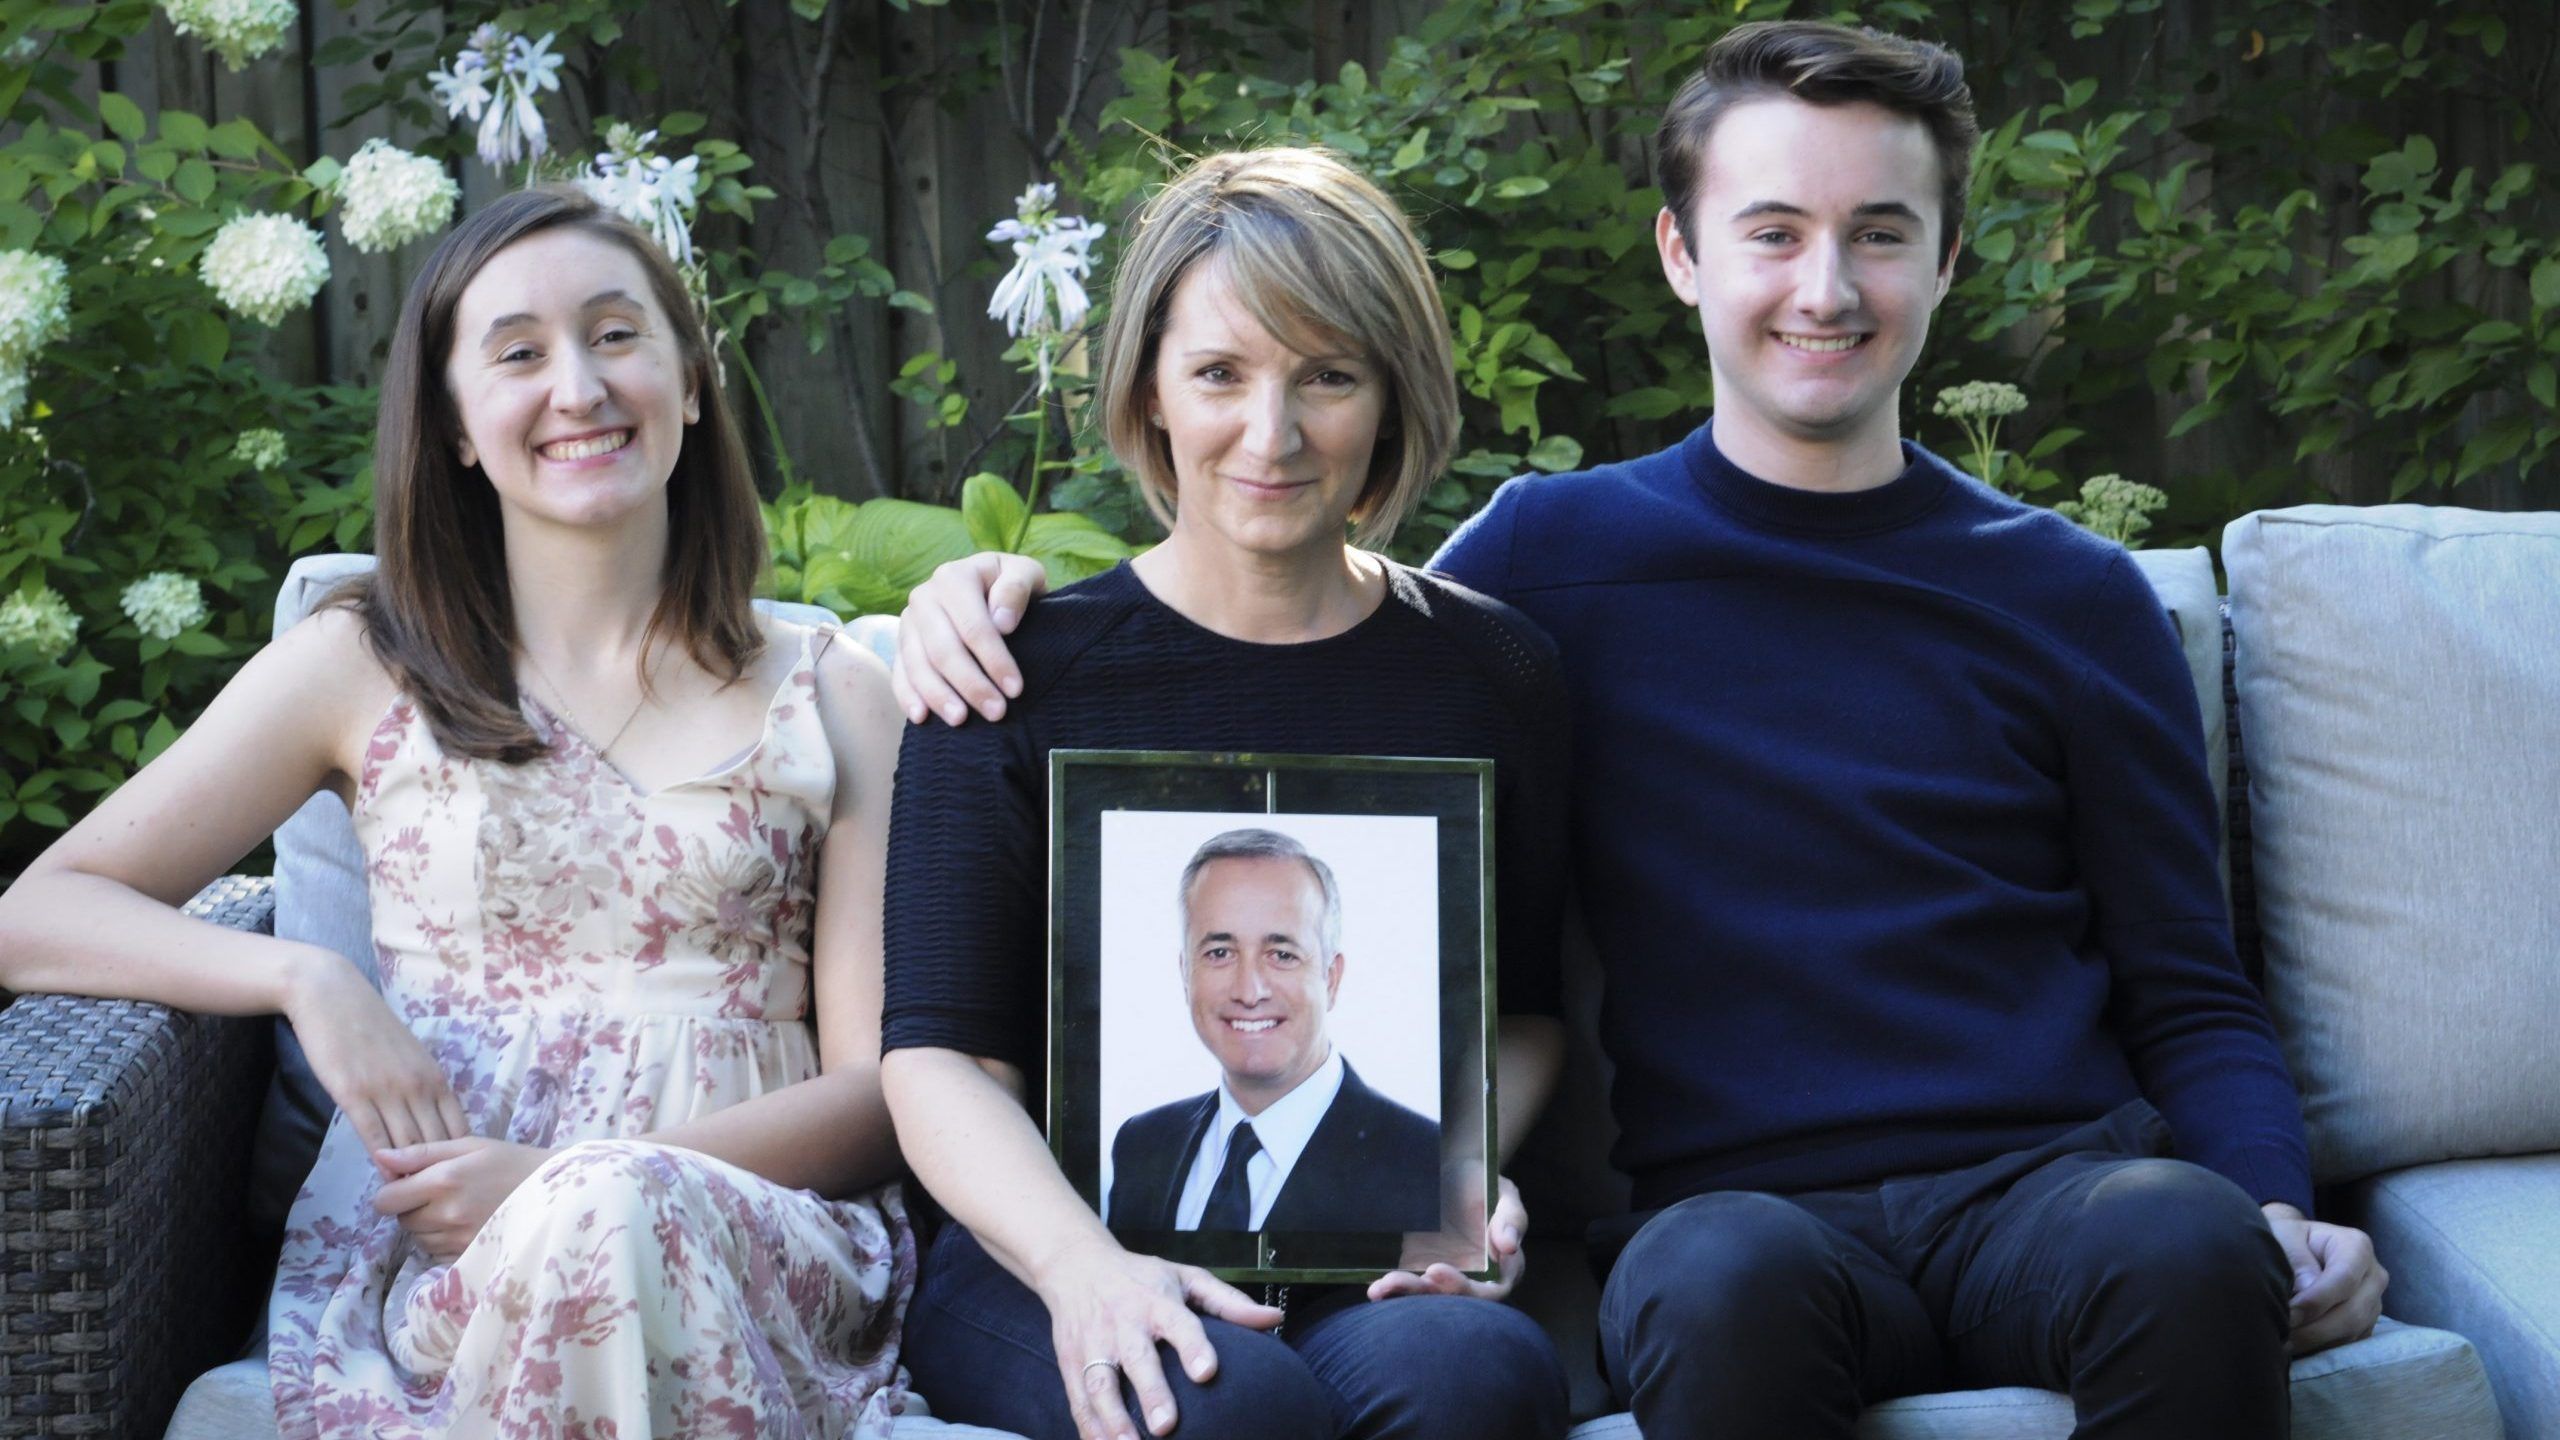 Adam Fanaki's children were 14 and 16 years old when their dad Adam was diagnosed with glioblastoma. SUPPLIED